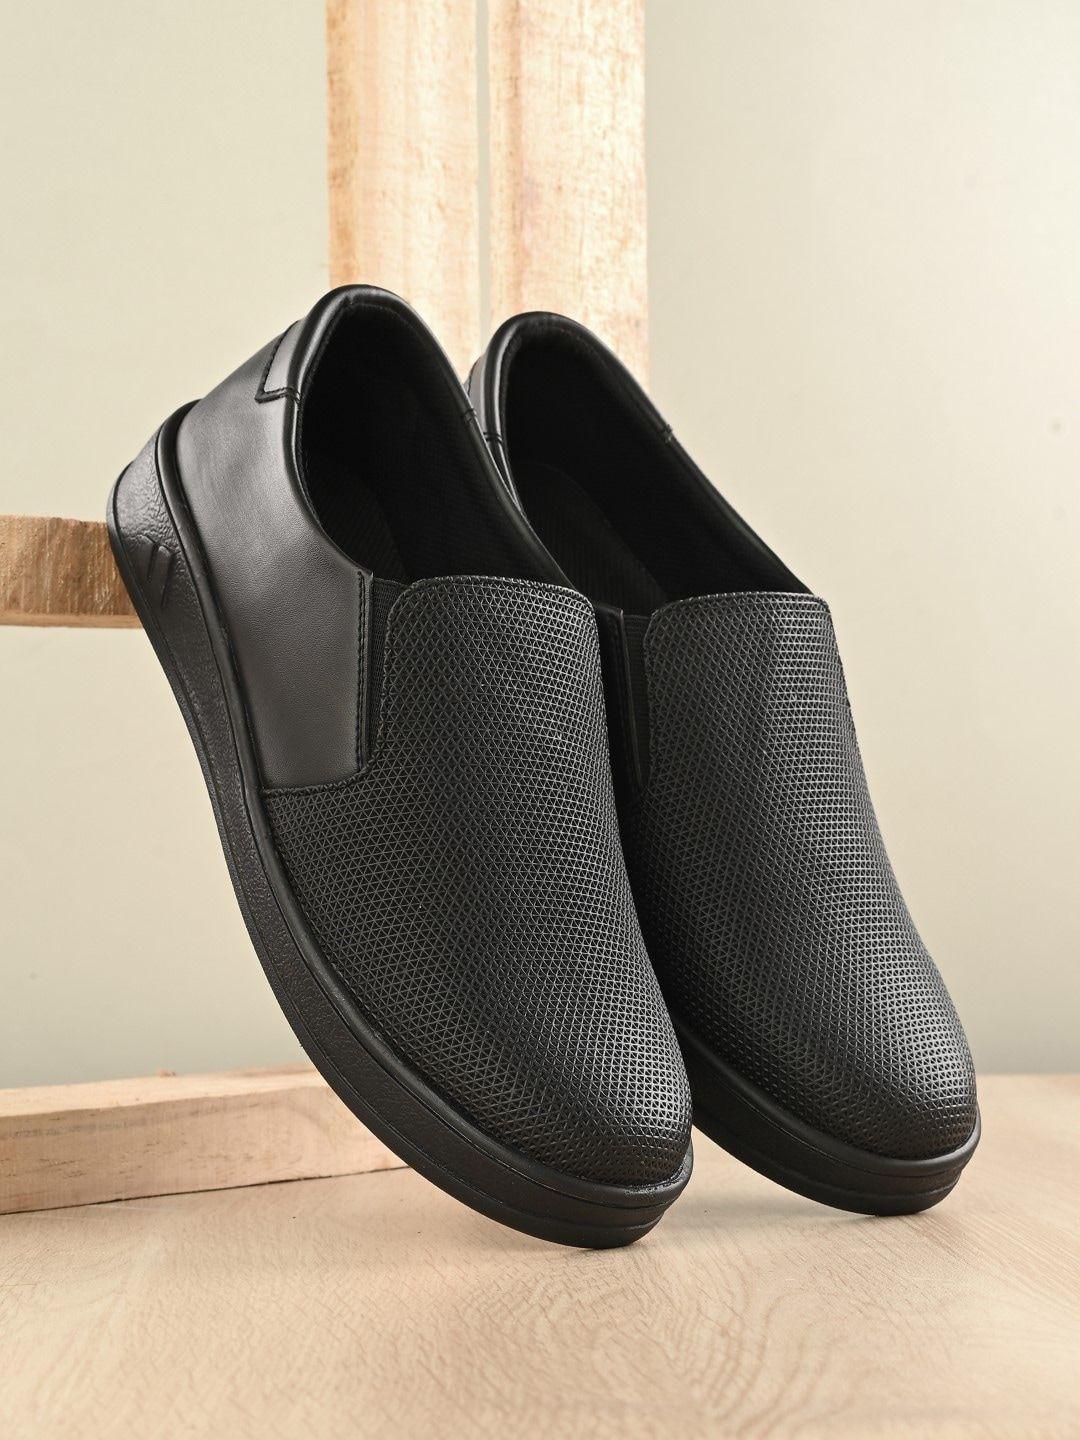 the roadster lifestyle co. men black textured lightweight slip on sneakers